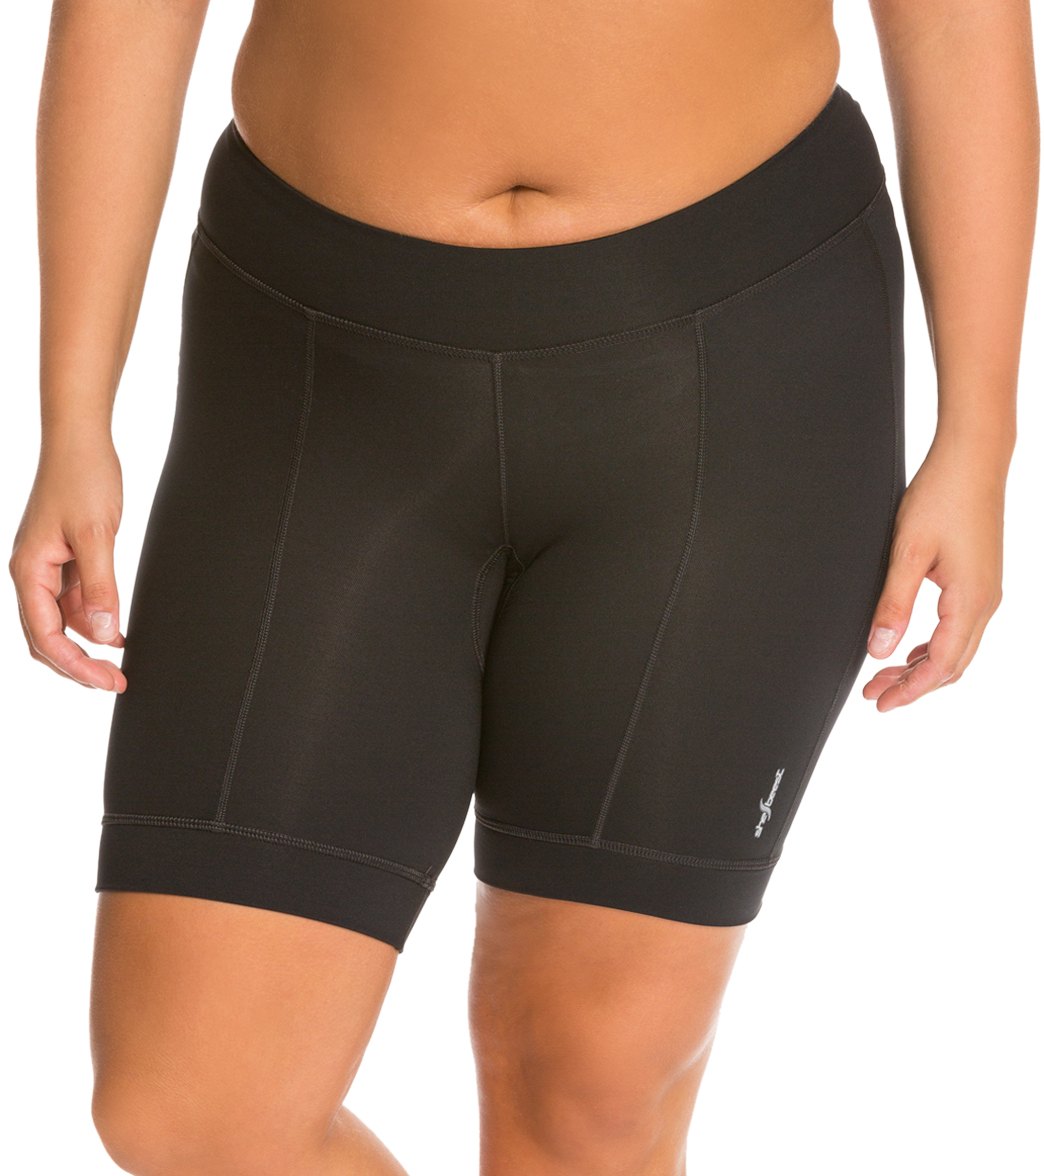 plus size cycling clothing